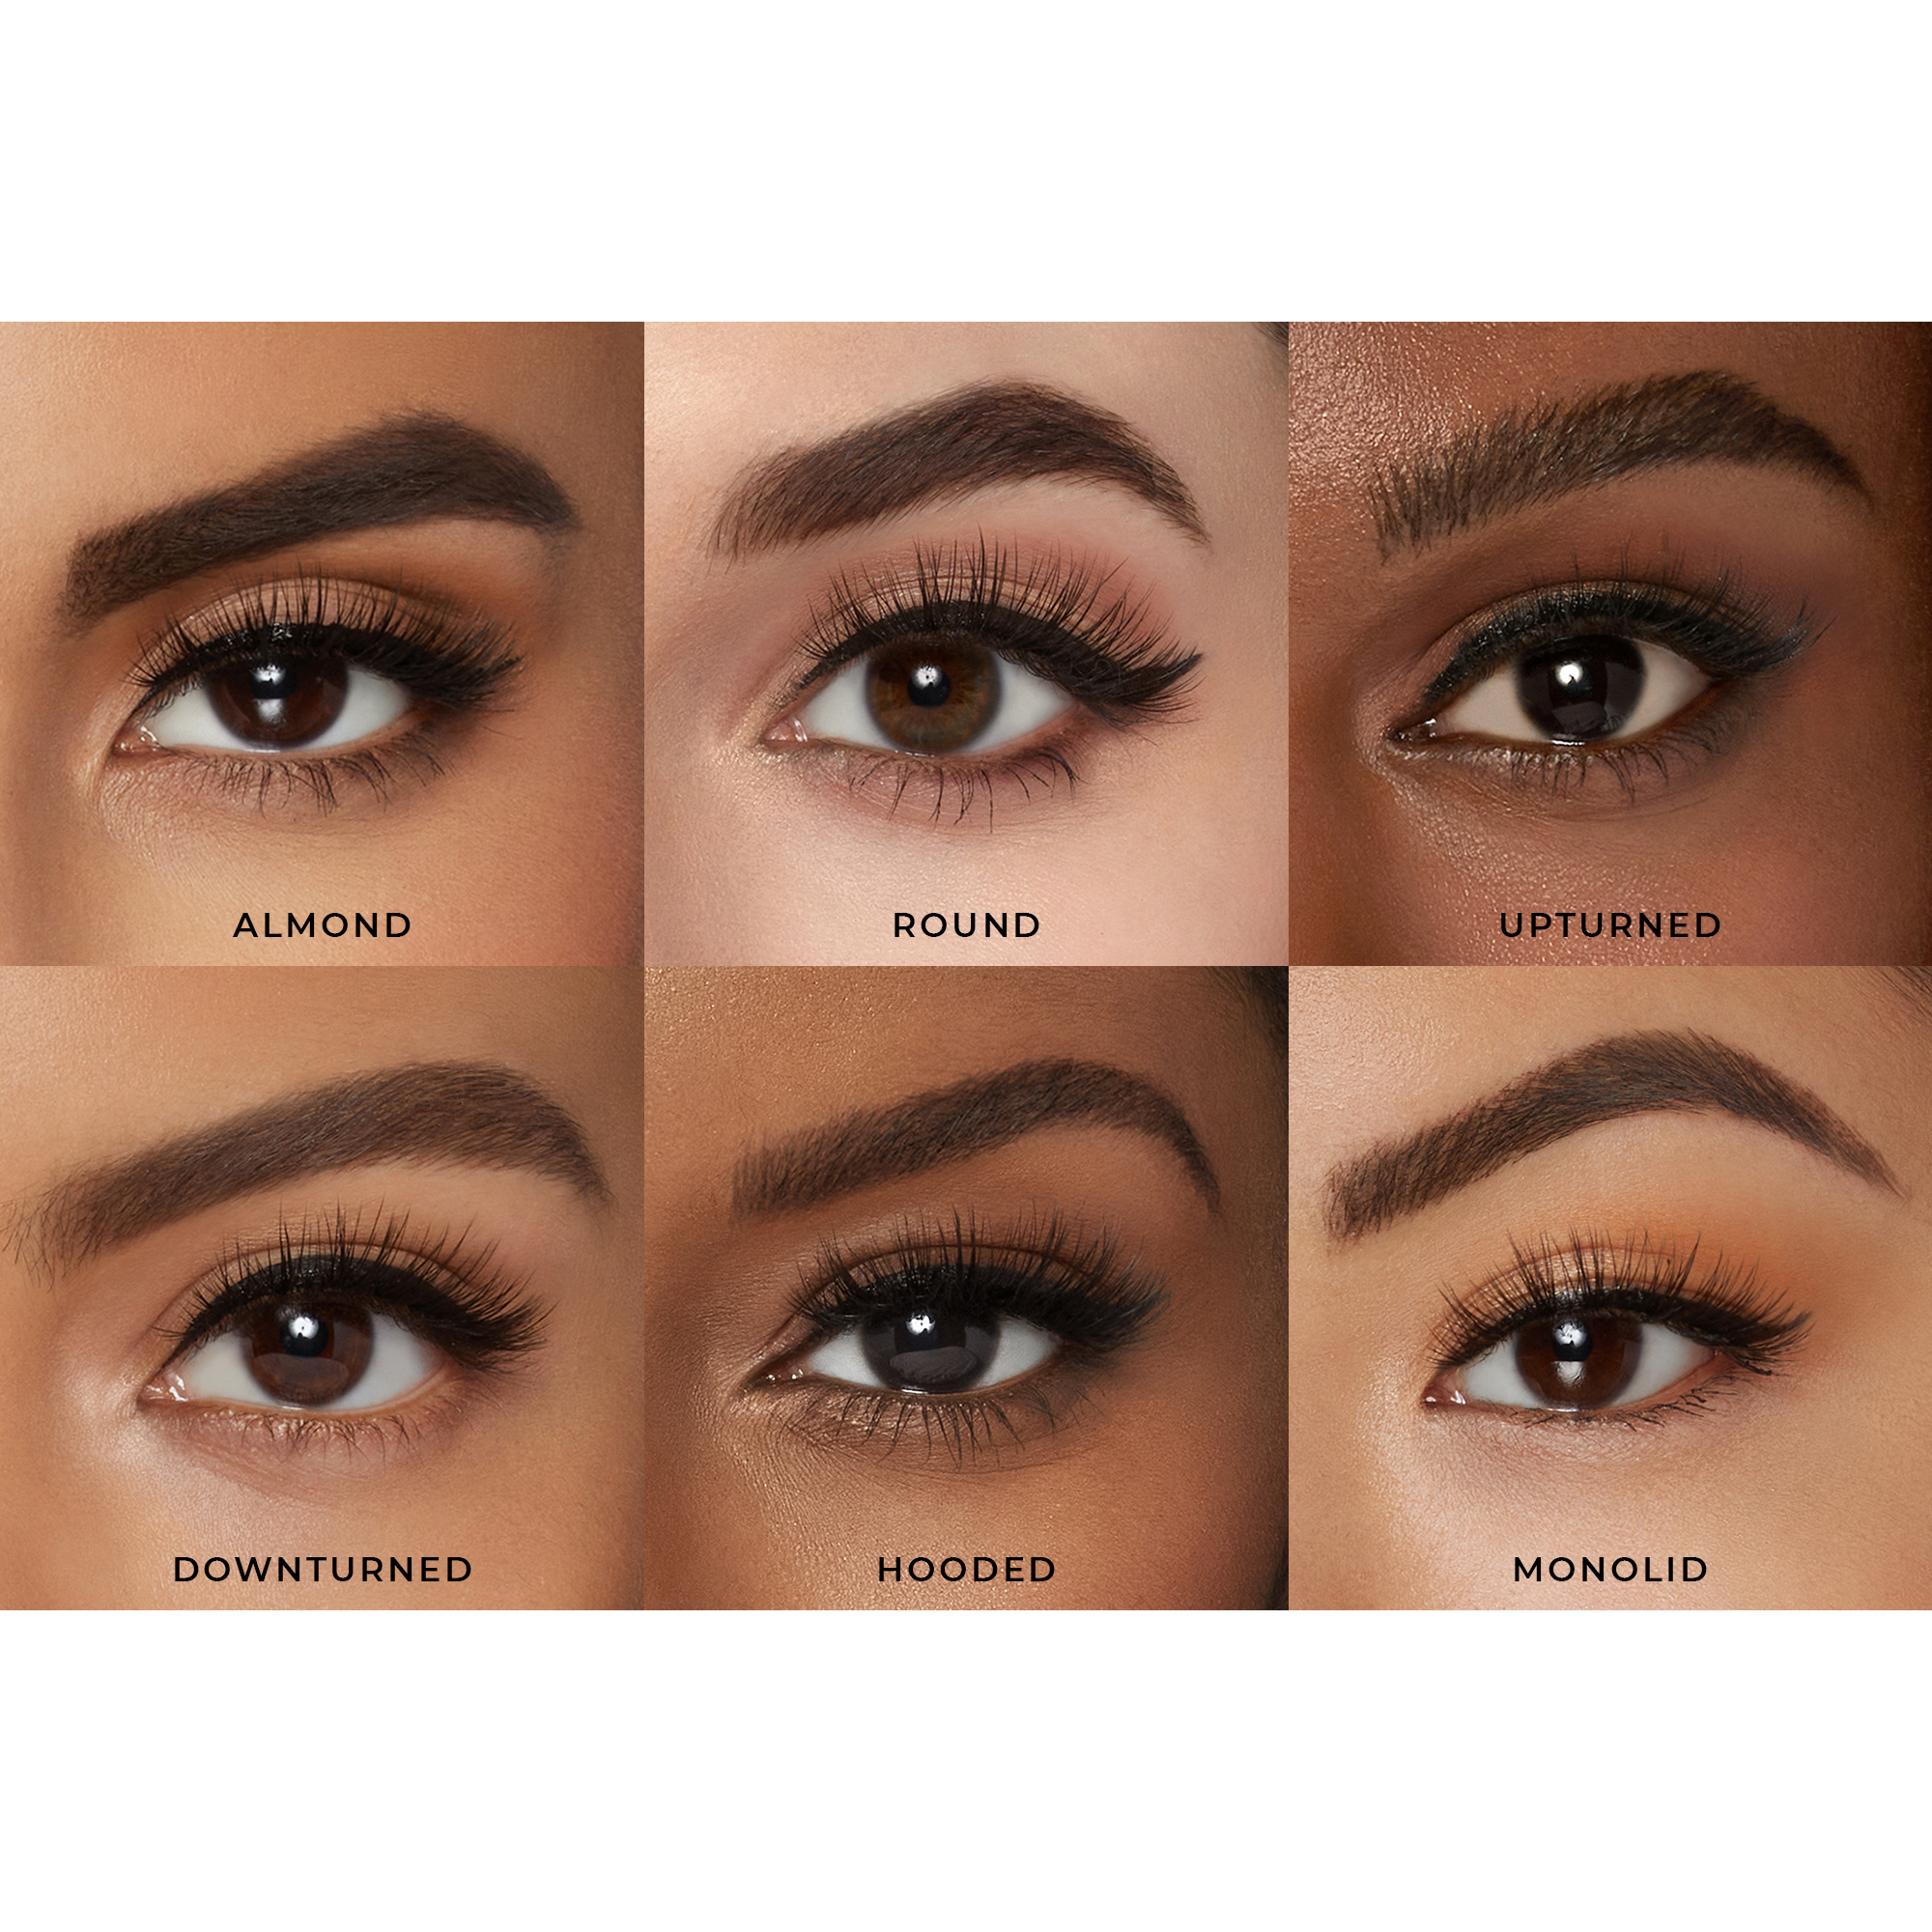 Lashes modelled on different eye shapes: Almond, Round, Upturned, Downturned, Hooded, Monolid